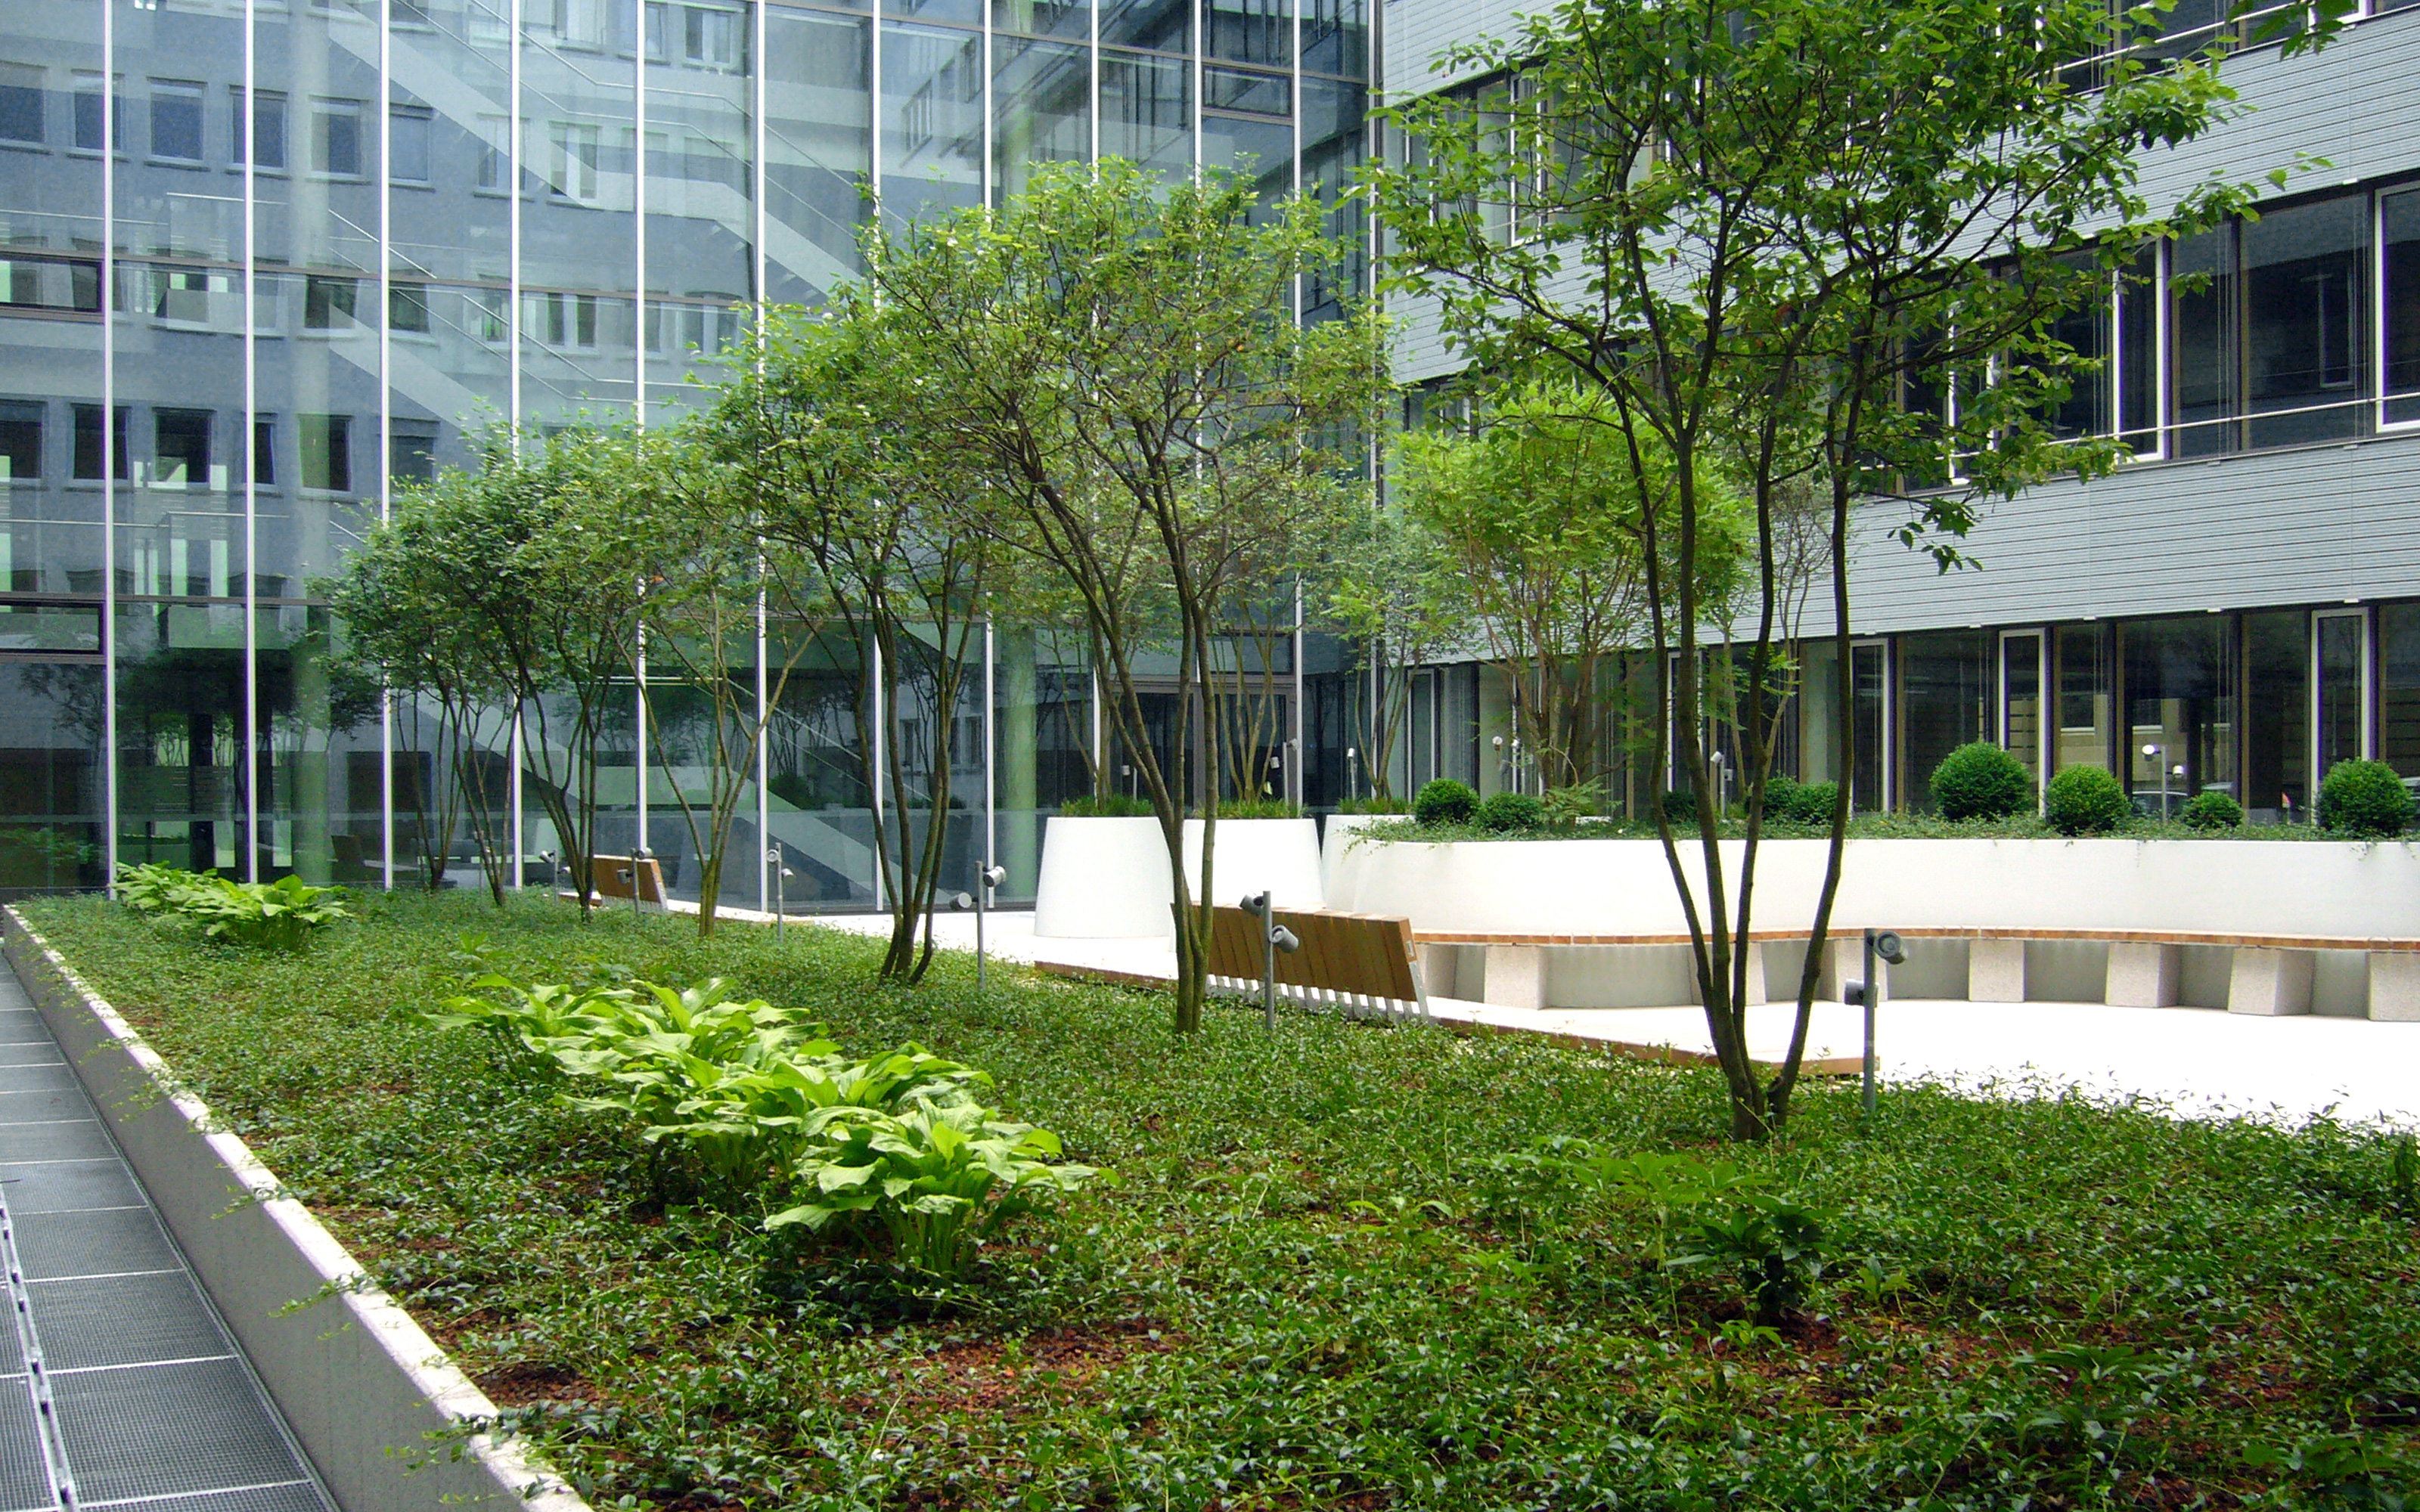 Green courtyard with planters